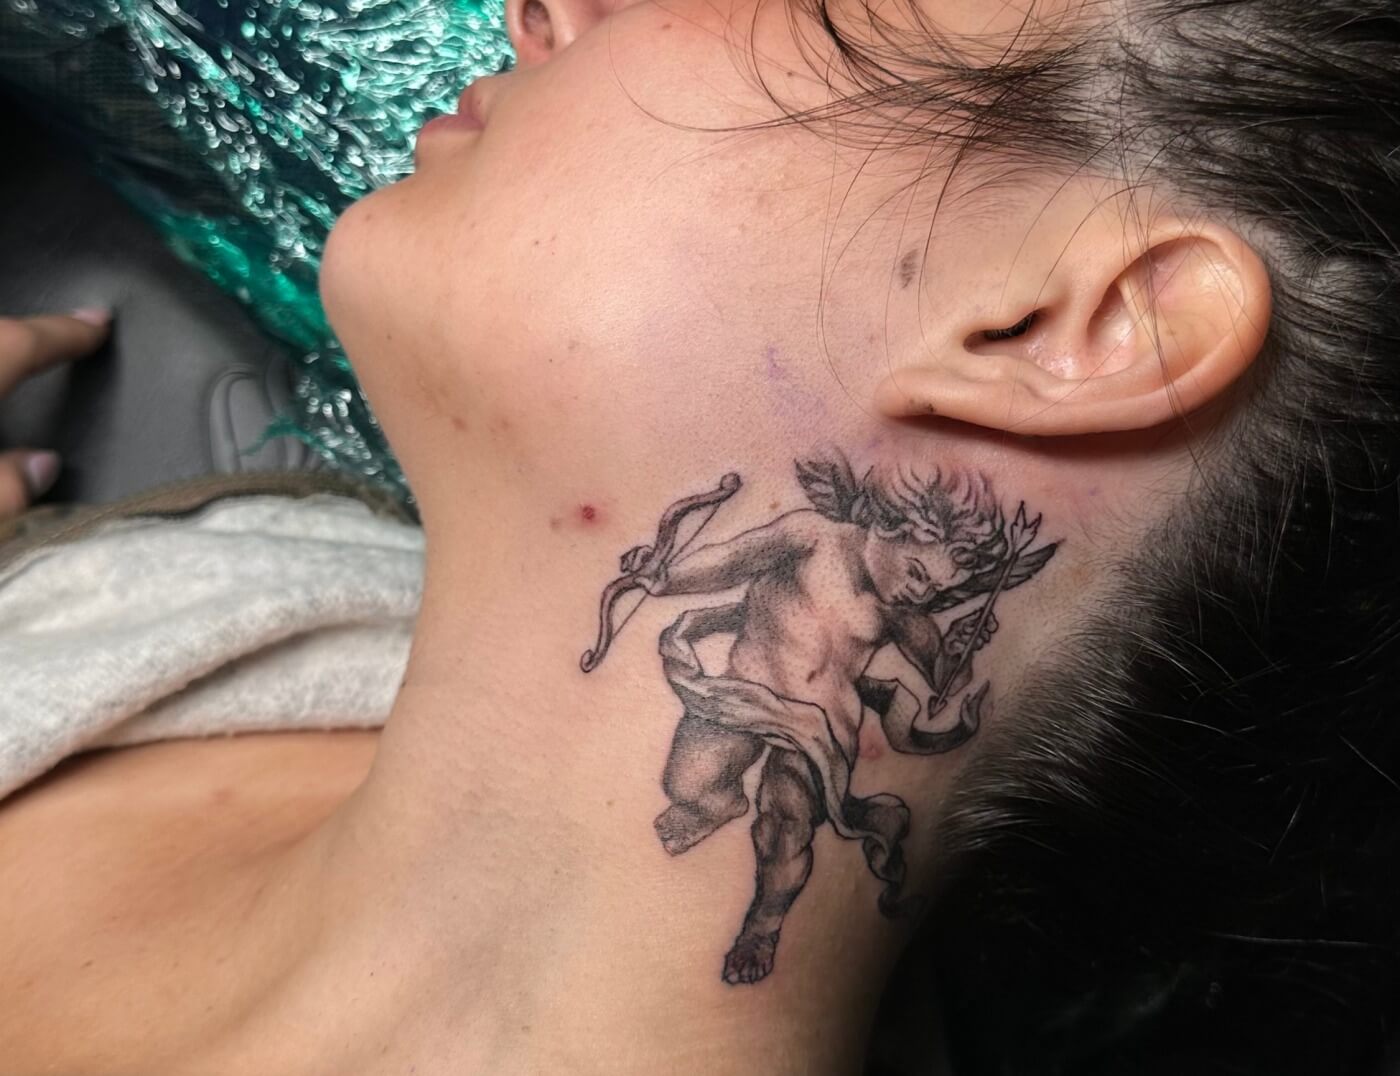 "Cupid Looking" Black & Grey Tattoo By Choze At Iron Palm Tattoos in Atlanta. Customers get cupid tattoos to signify the romanticism inside. Call 404-973-7828 or stop by for a free consultation with Choze or another body artist. Walk ins are welcome..